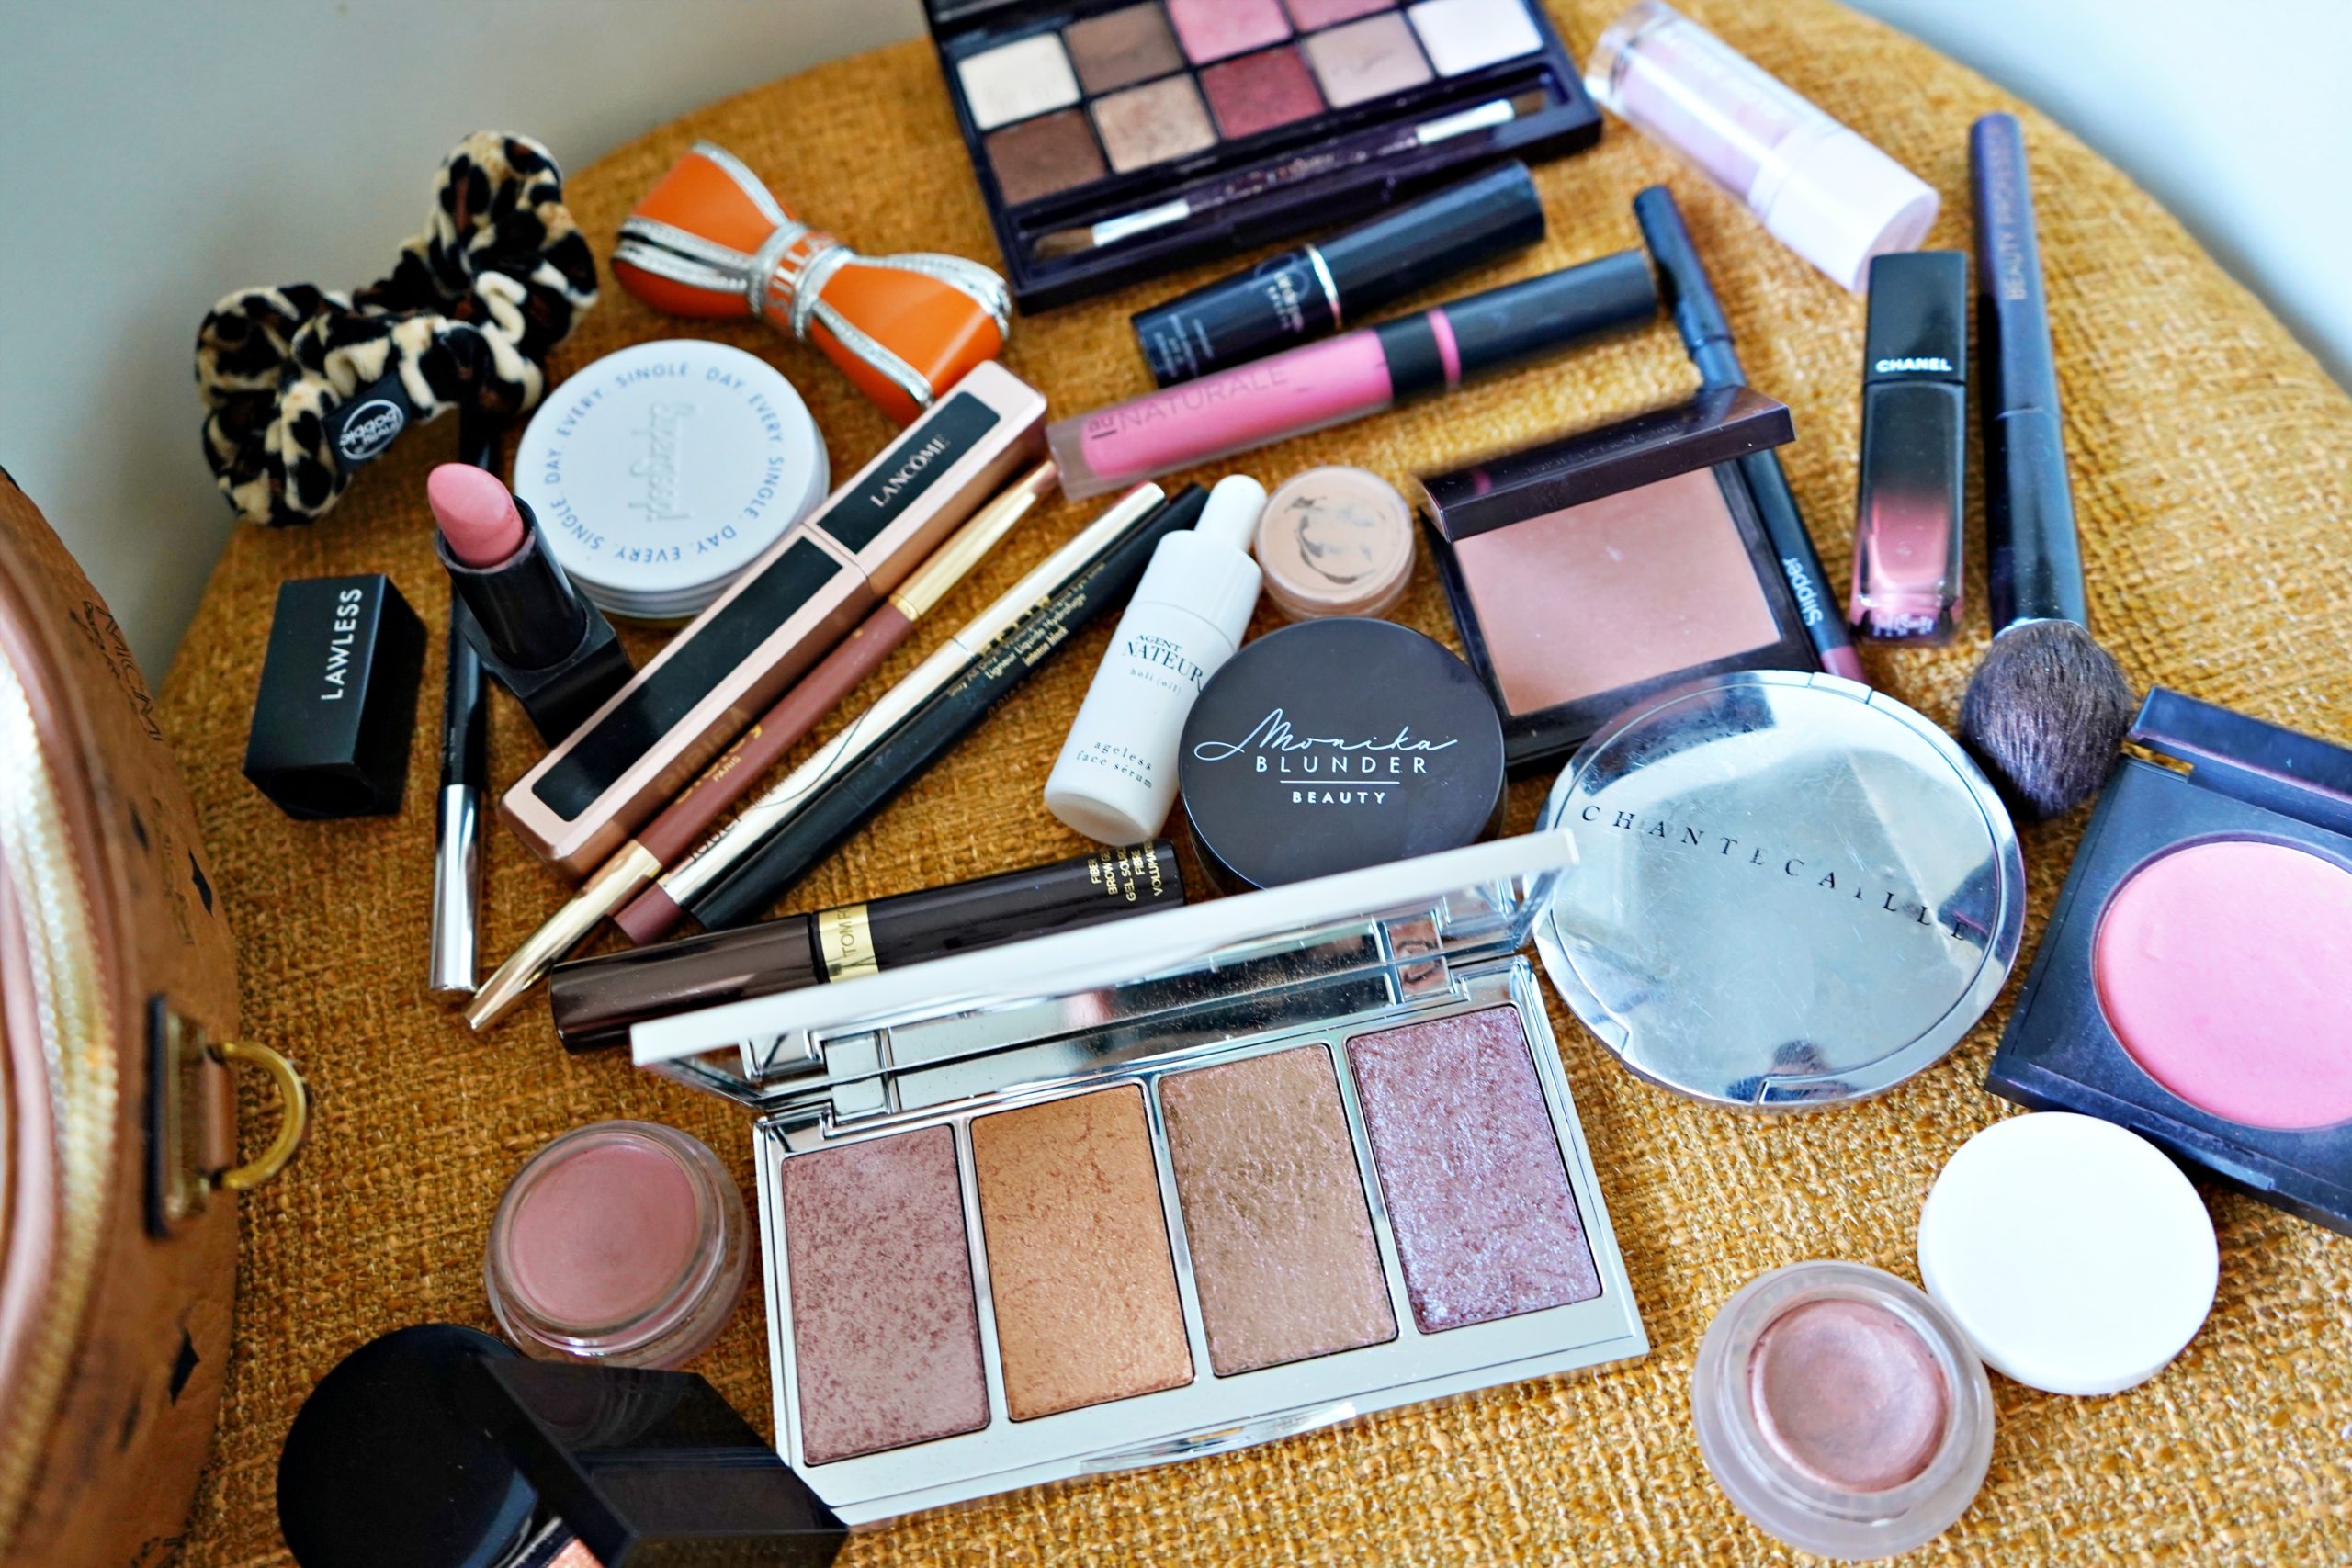 Whats in My Bag and on My Face: Winter Edition